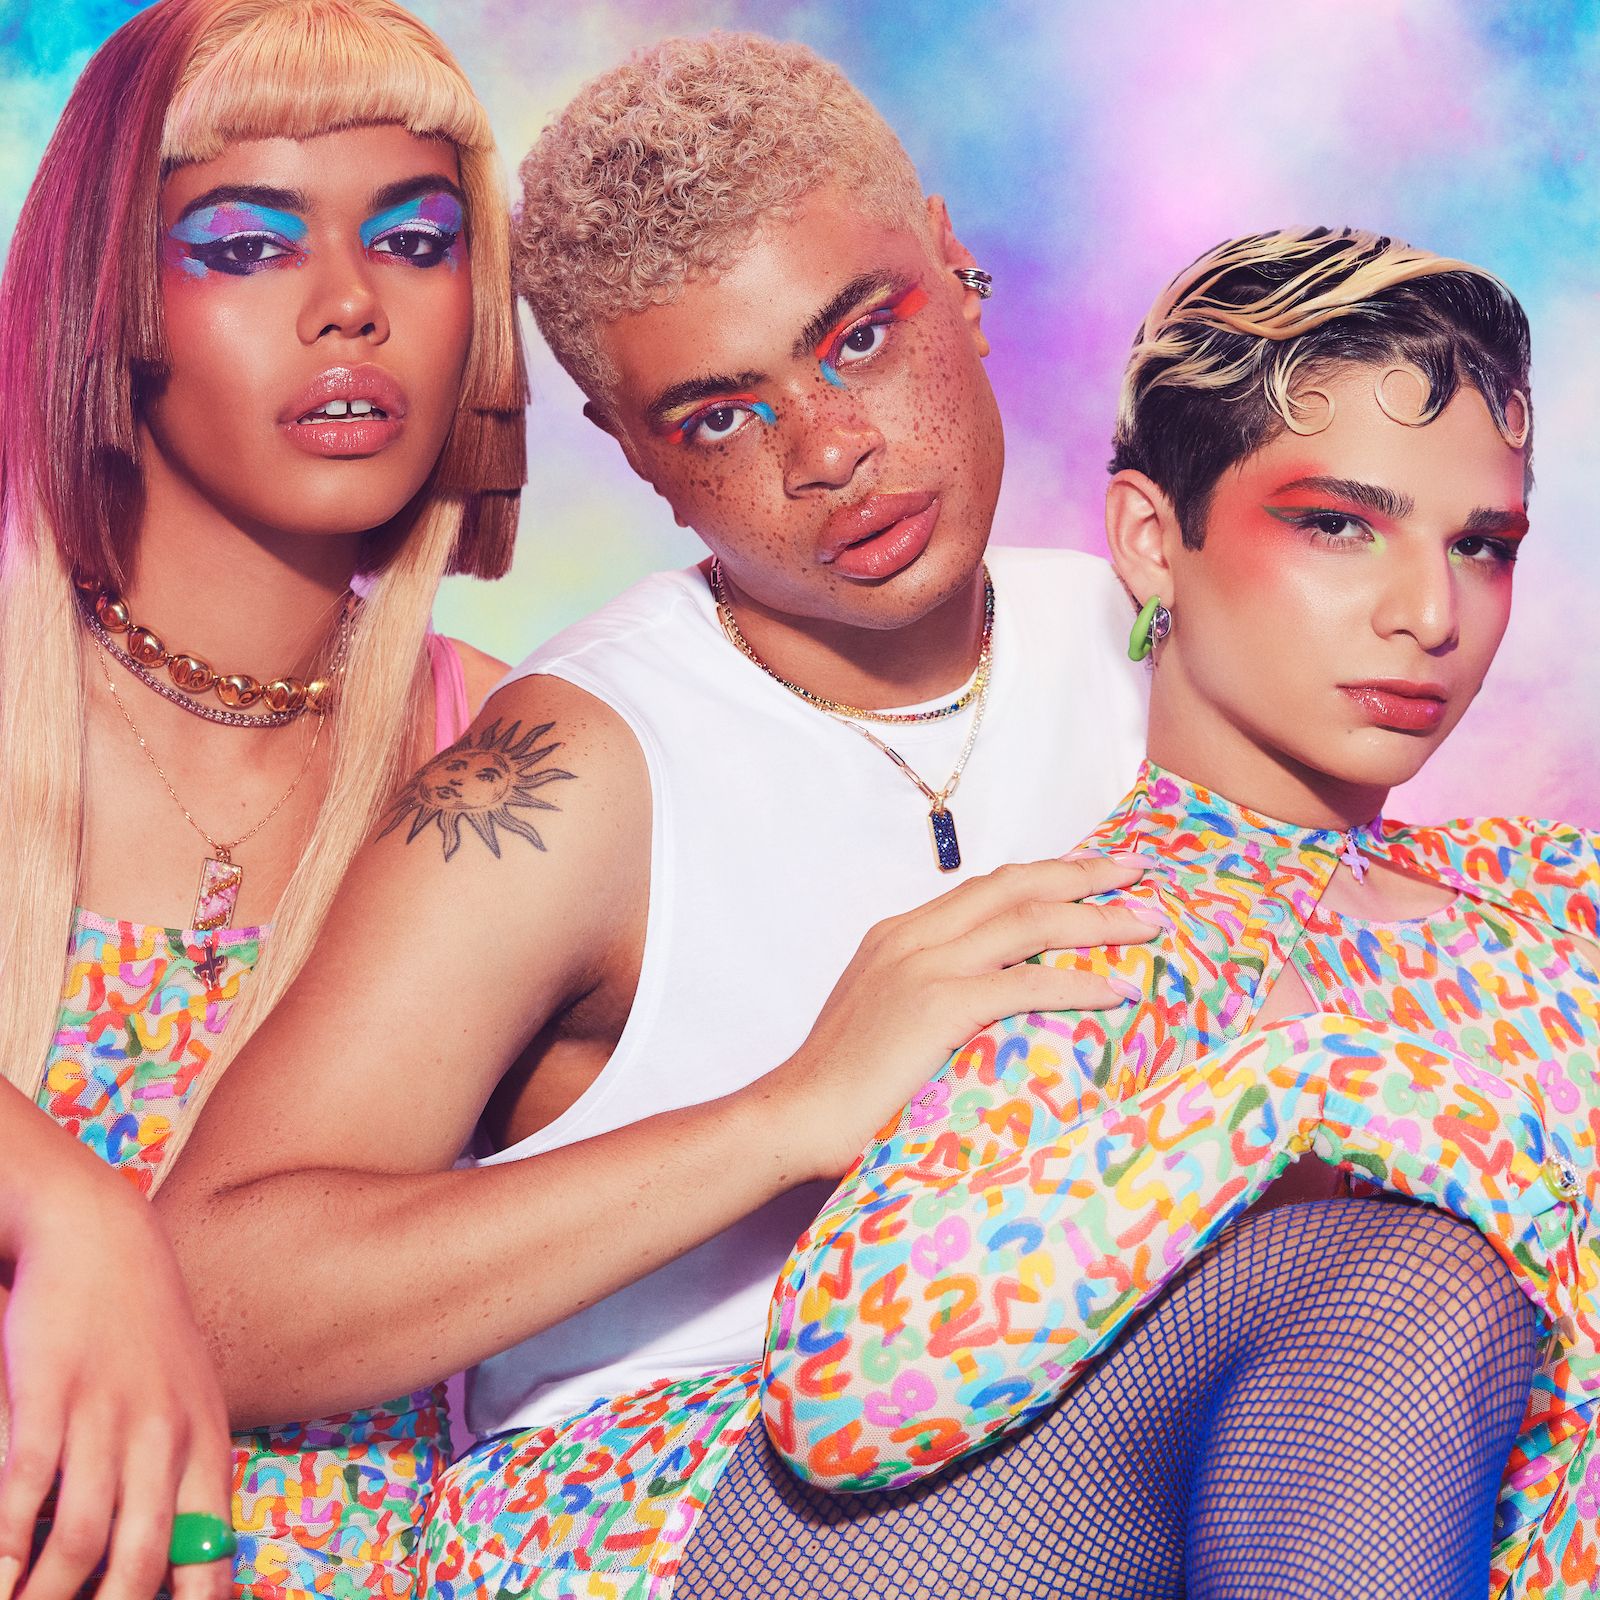 Savage x Fenty Just Dropped a New Collection for Pride, and It's *Gorgeous*